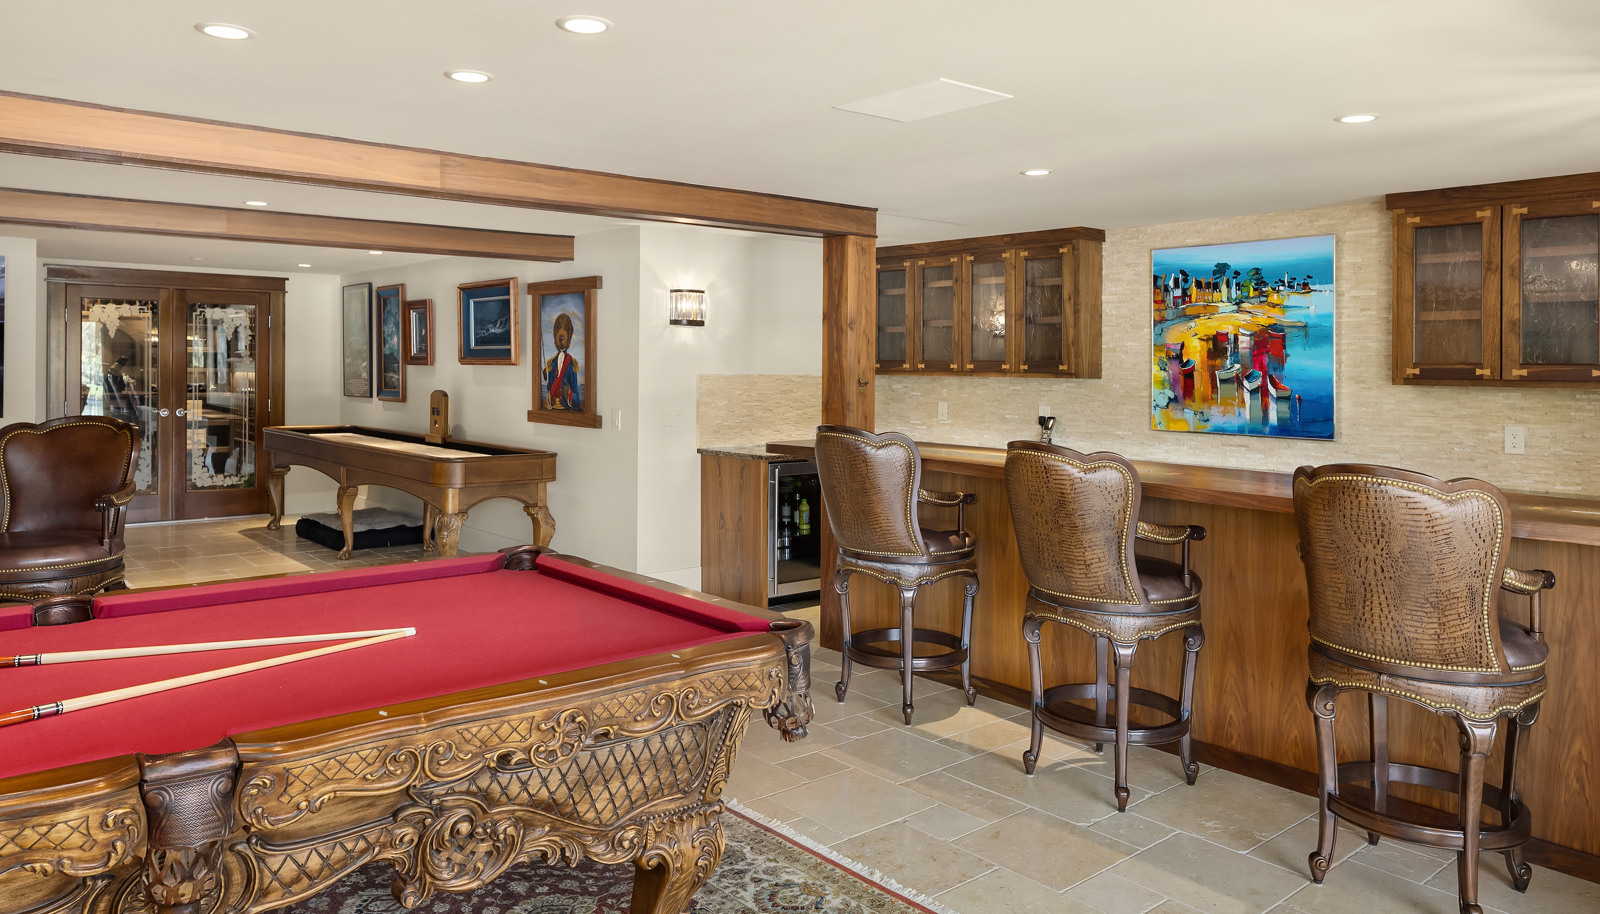 The Media/ Recreation room has a shuffle board, a 900 bottle wine cellar and a propane fireplace. 